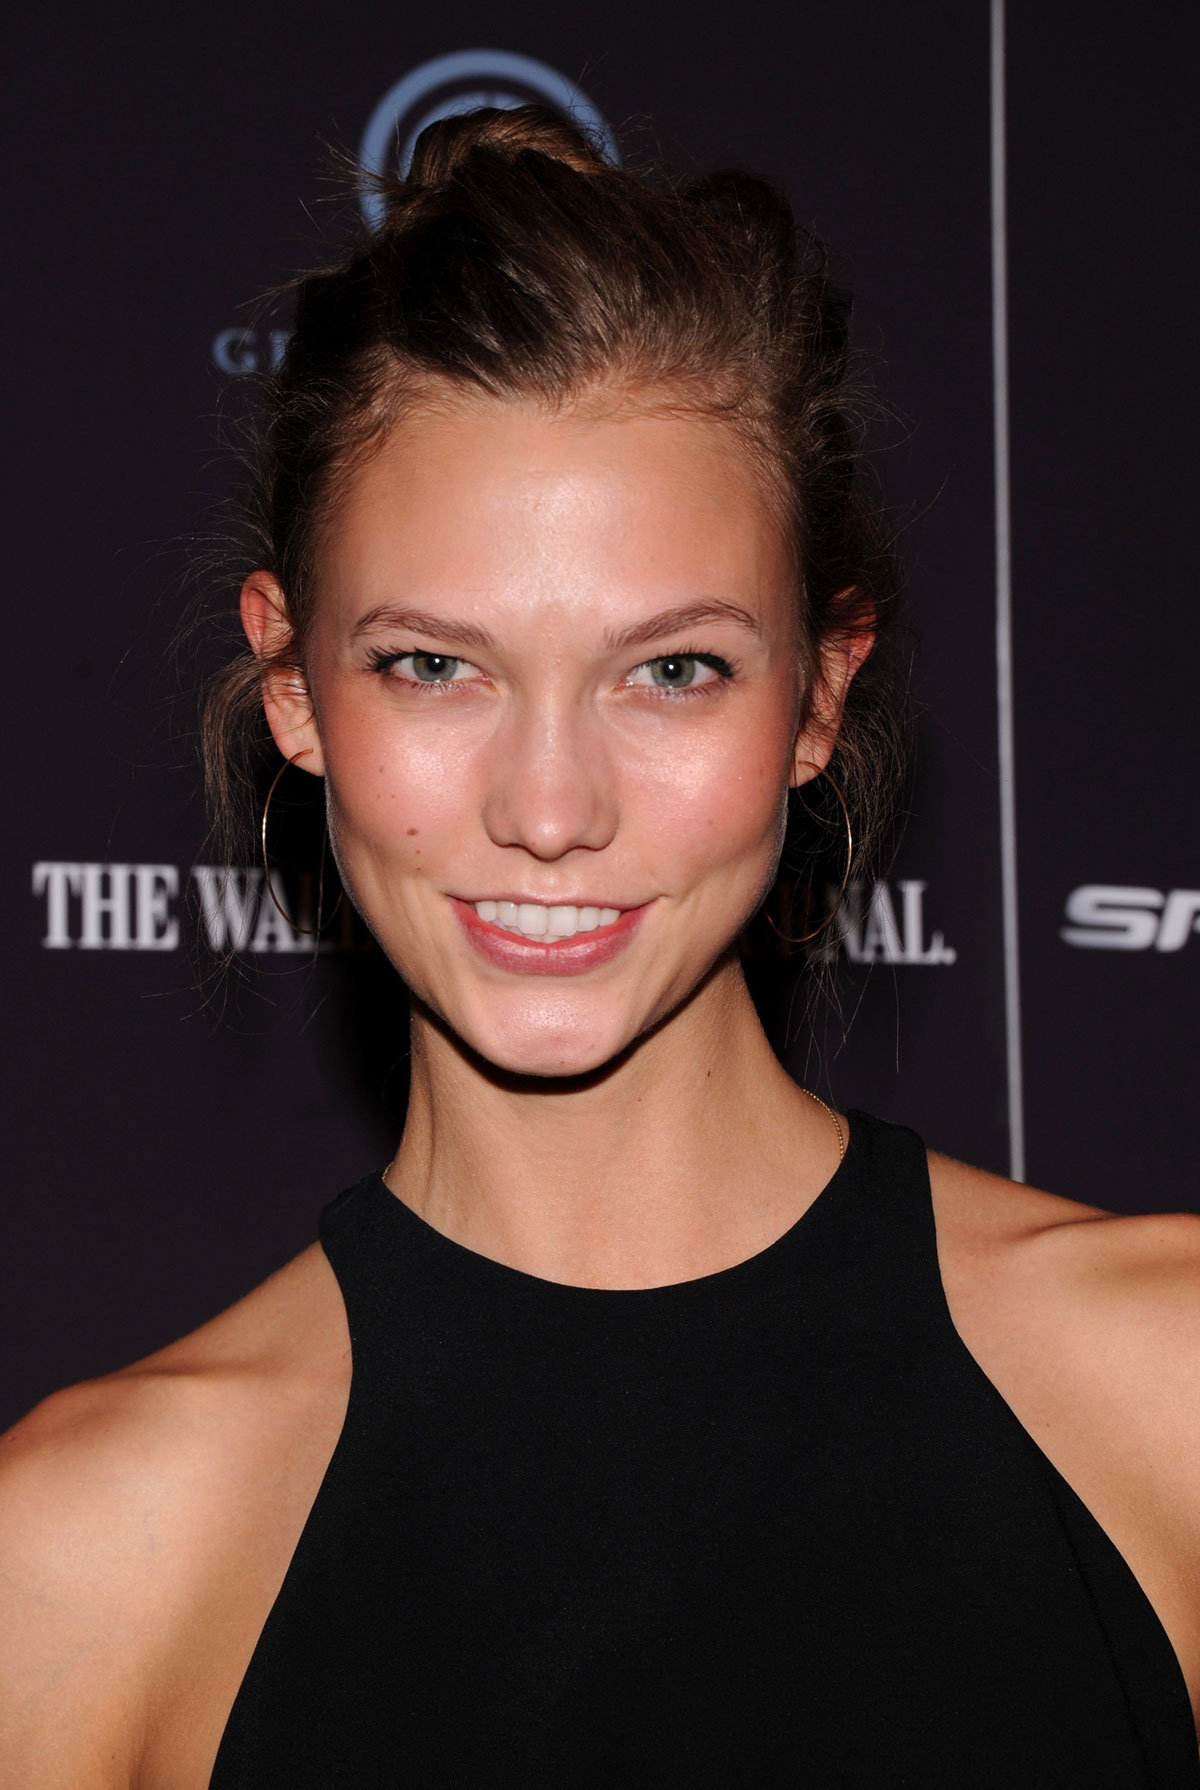 KARLIE KLOSS at The Amazing Spider-man Premiere in Los Angeles – HawtCelebs